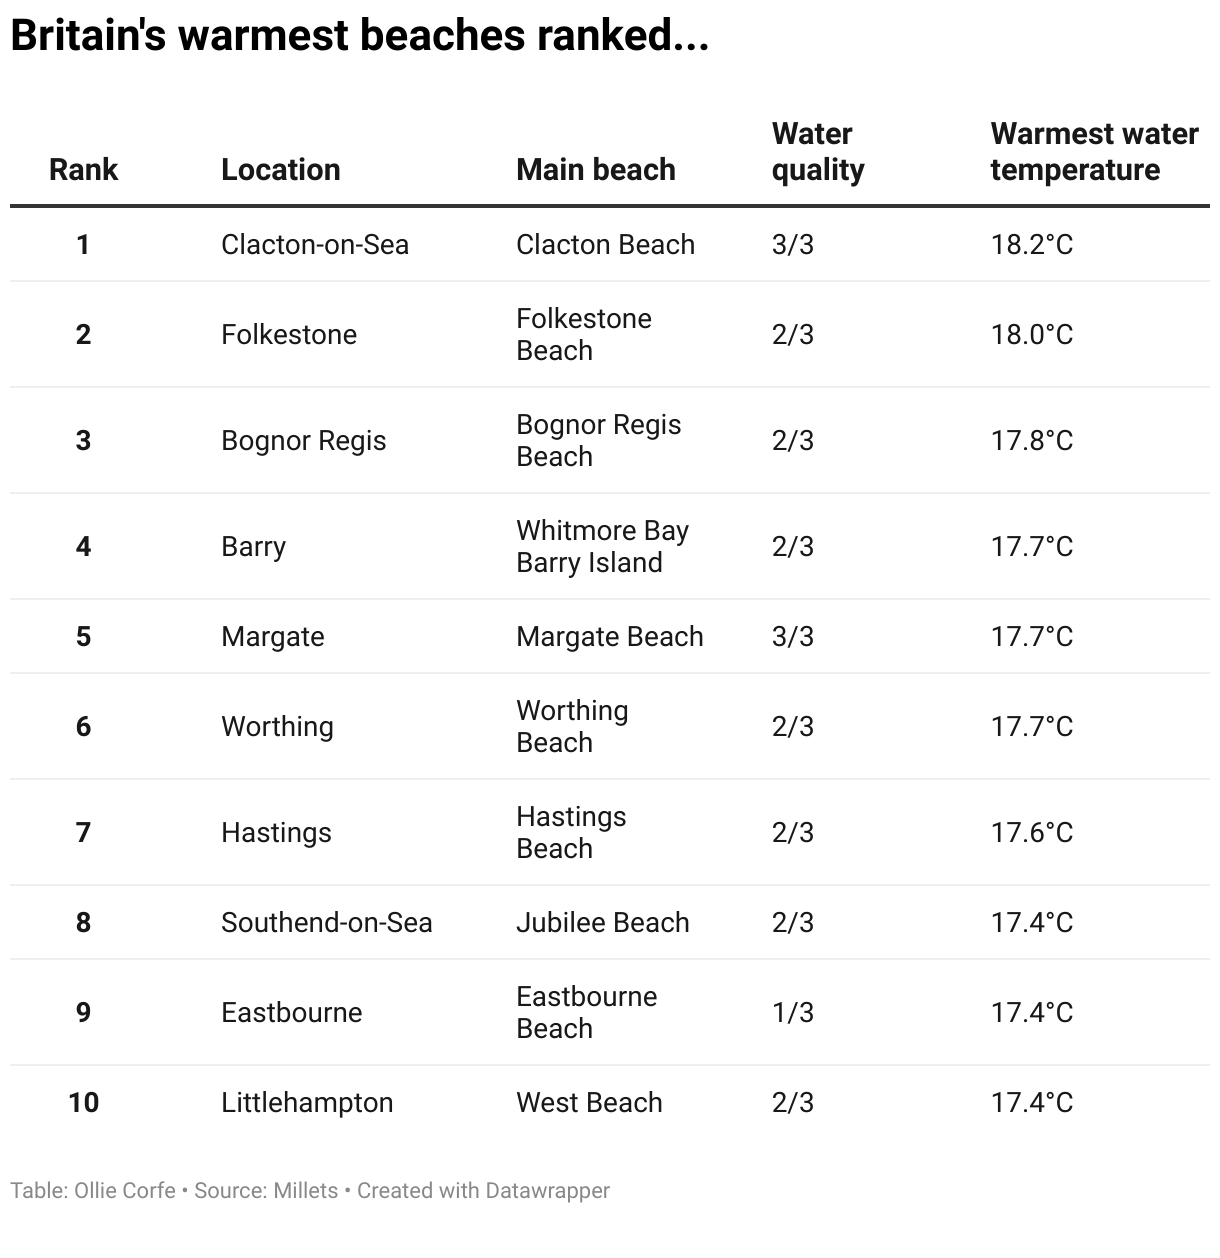 Table of warmest beaches.